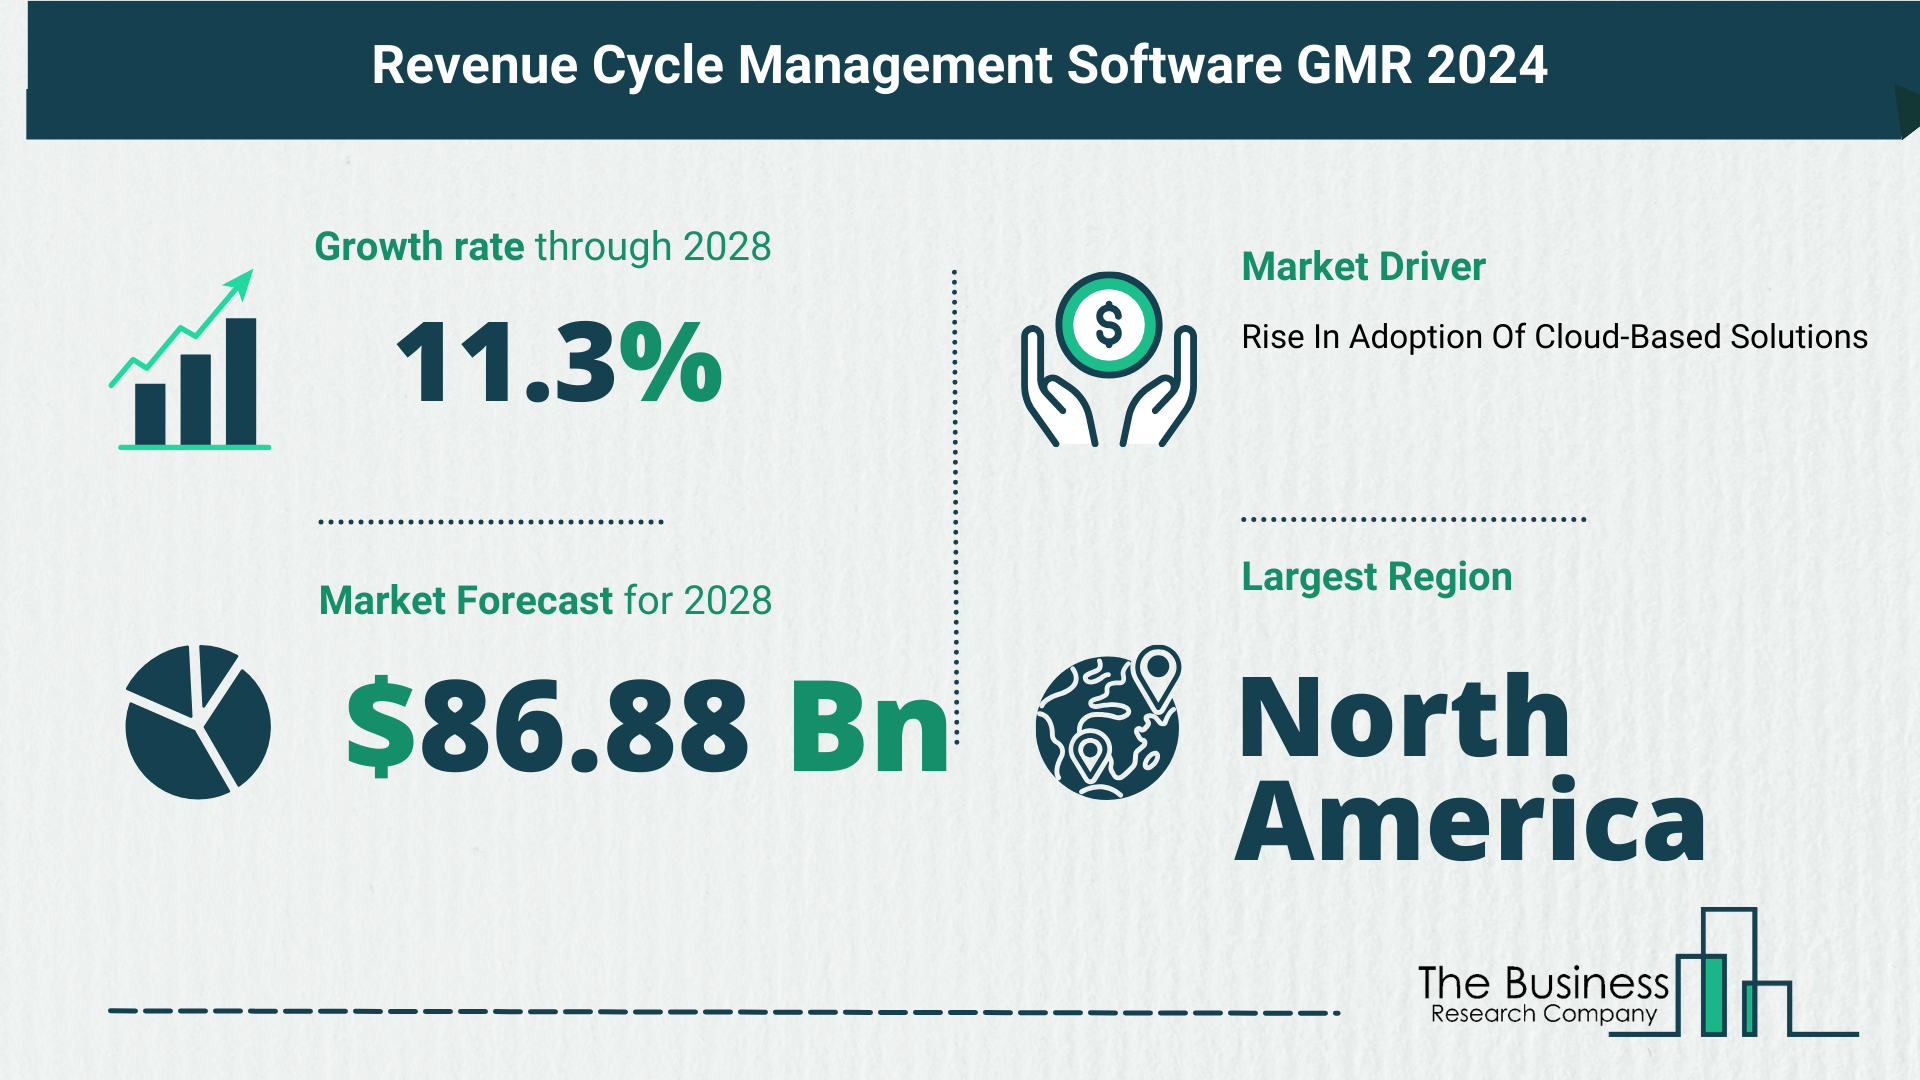 5 Takeaways From The Revenue Cycle Management Software Market Overview 2024